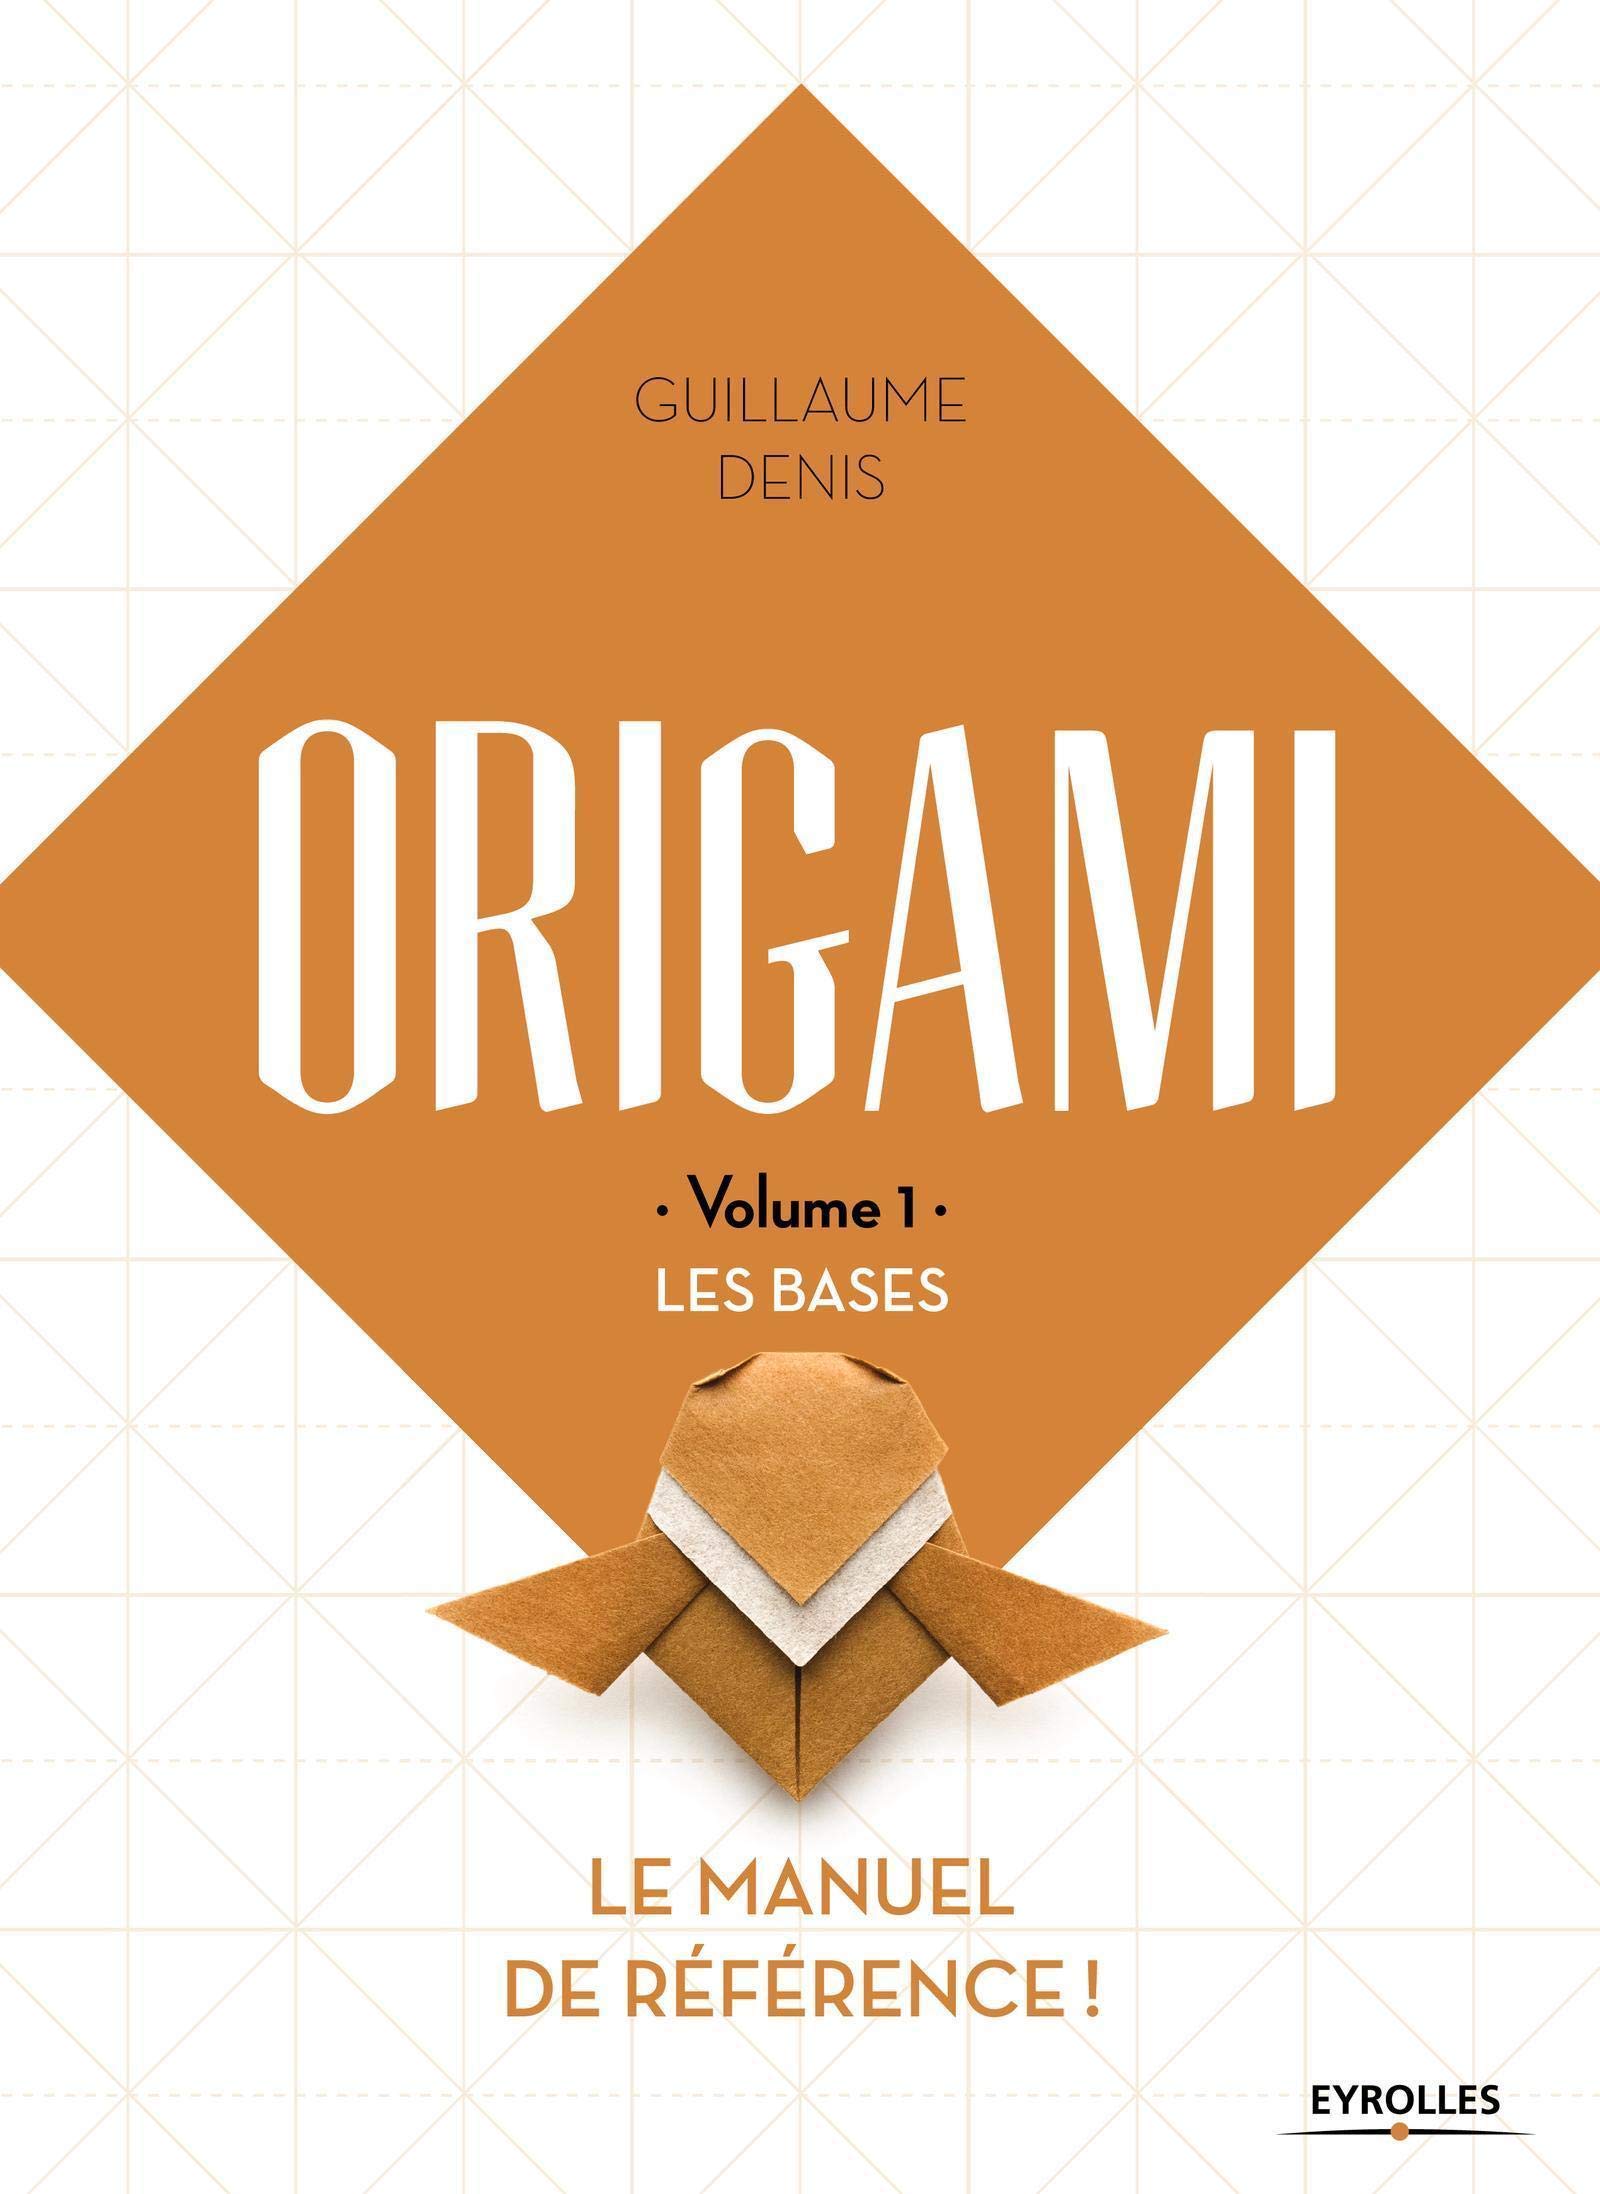 ORIGAMI - Volume 1 - LES BASES : page 233.